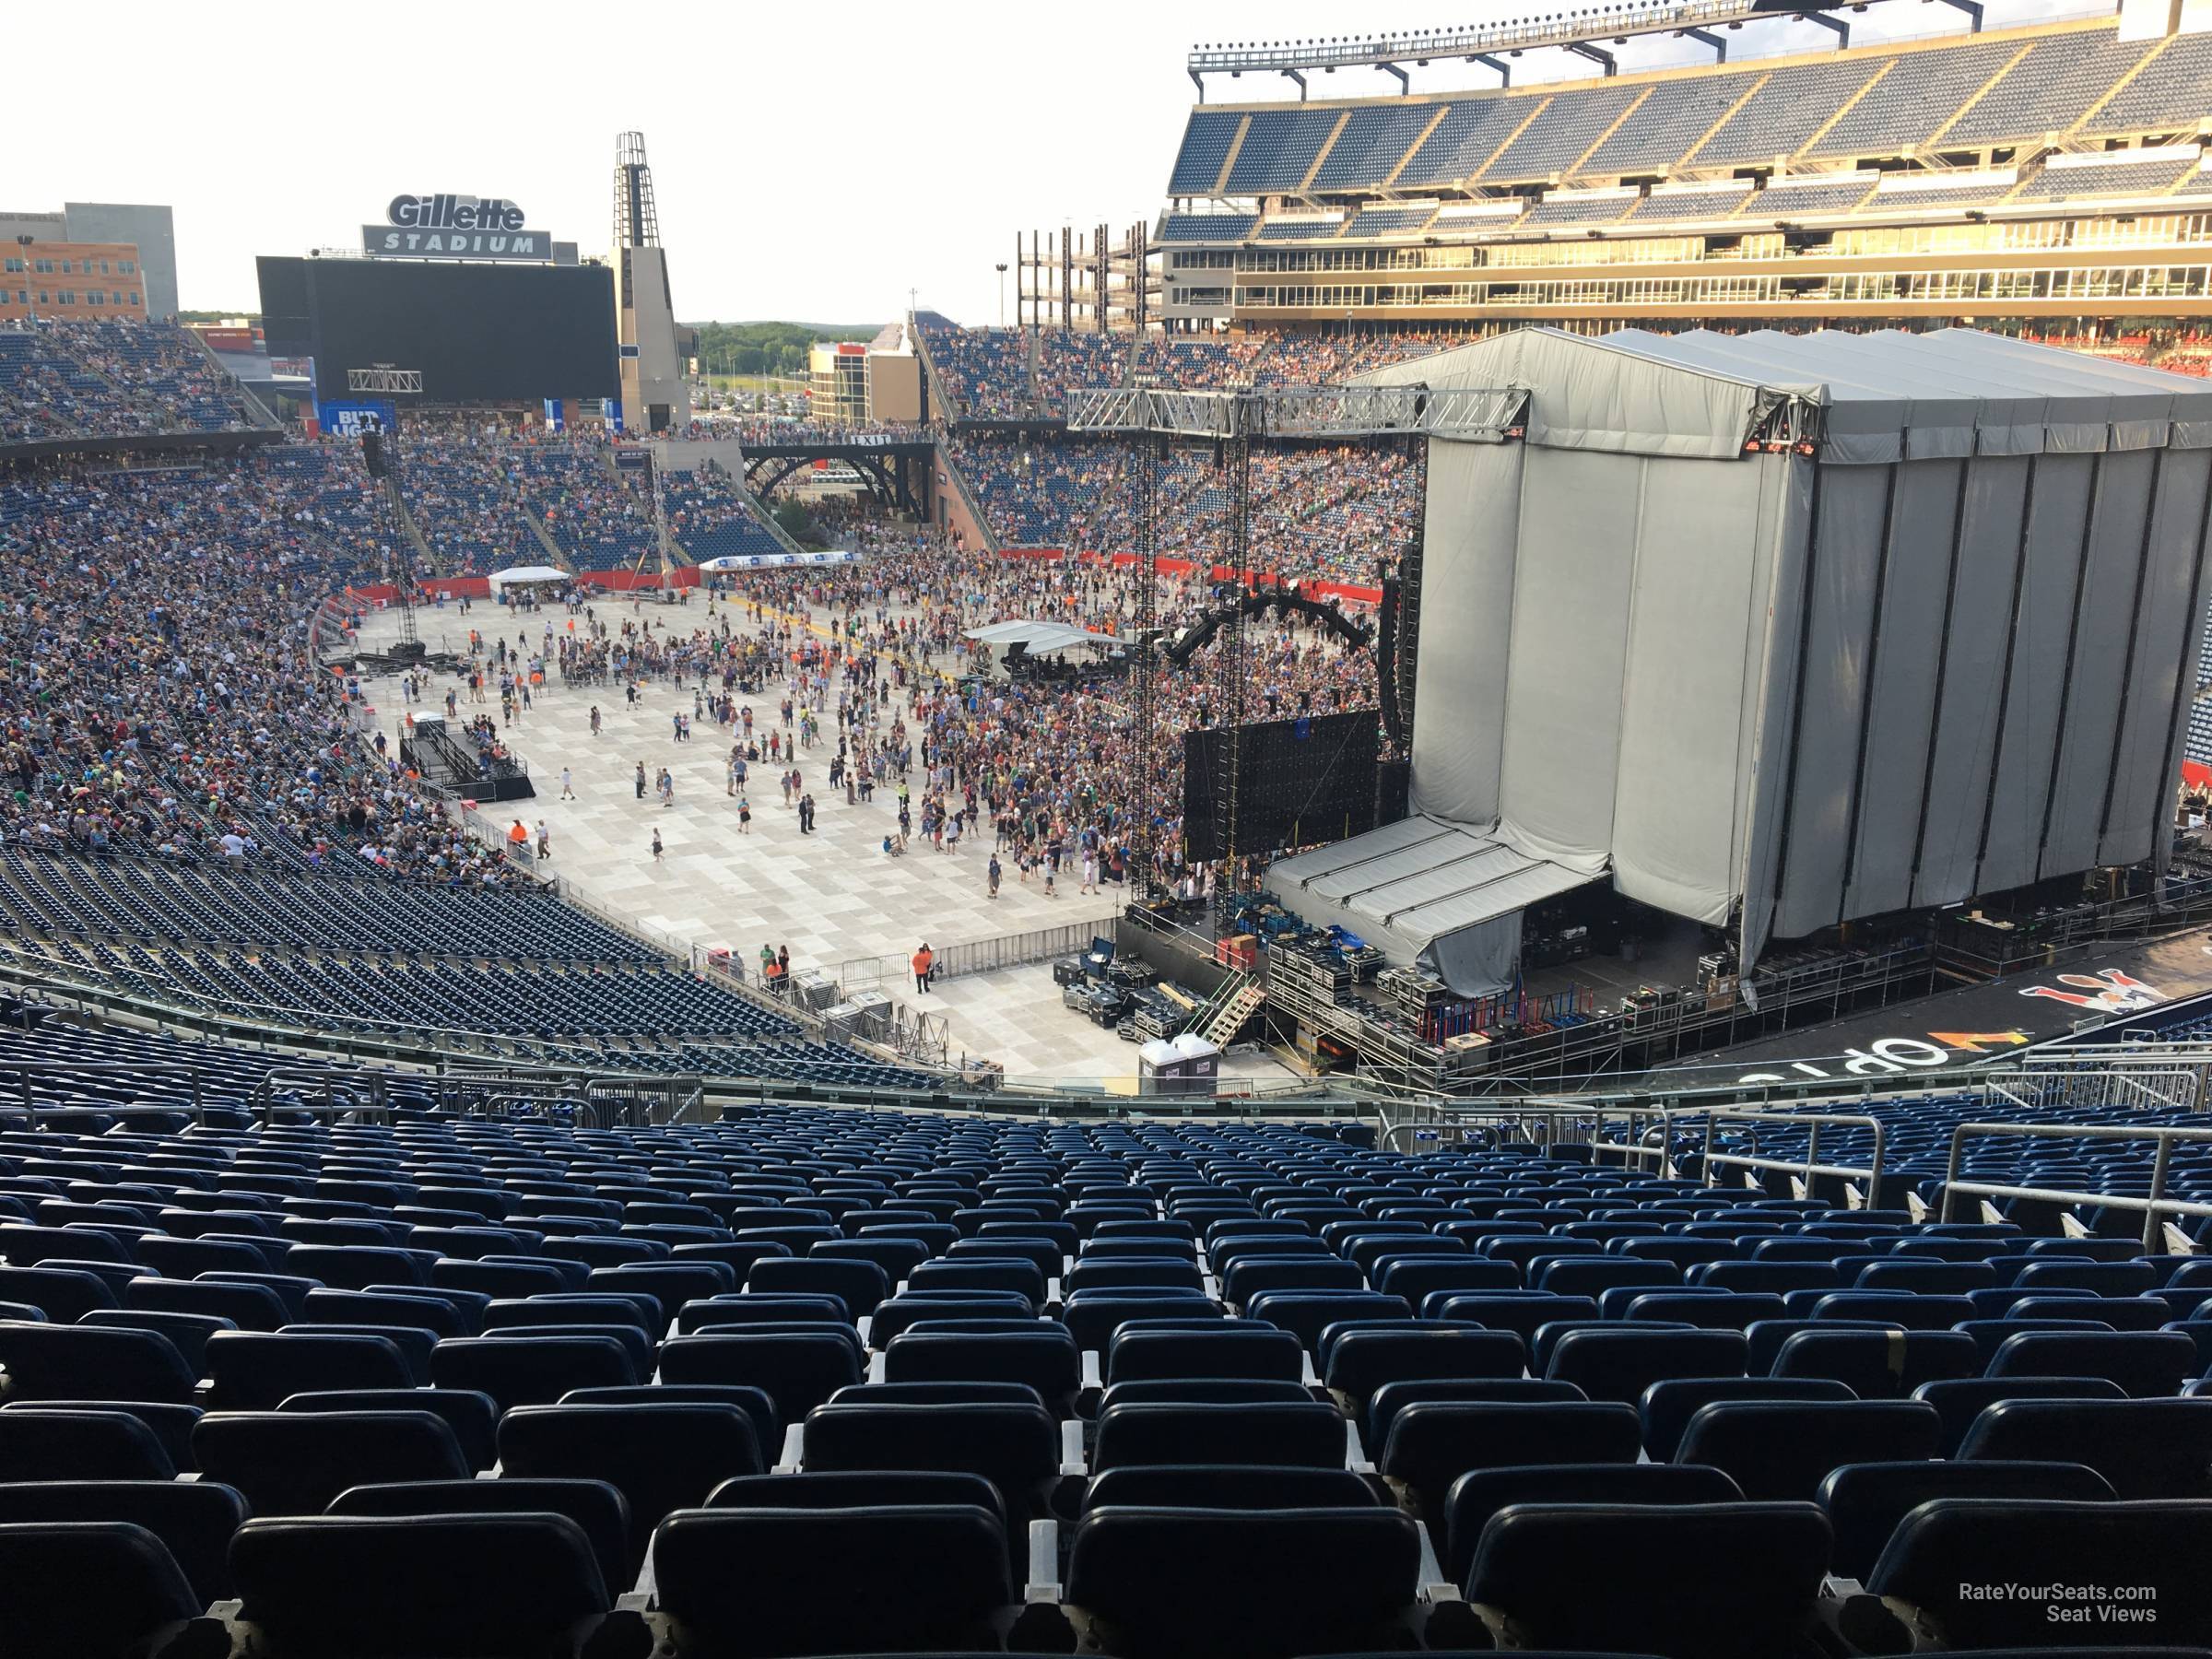 section 224, row 27 seat view  for concert - gillette stadium